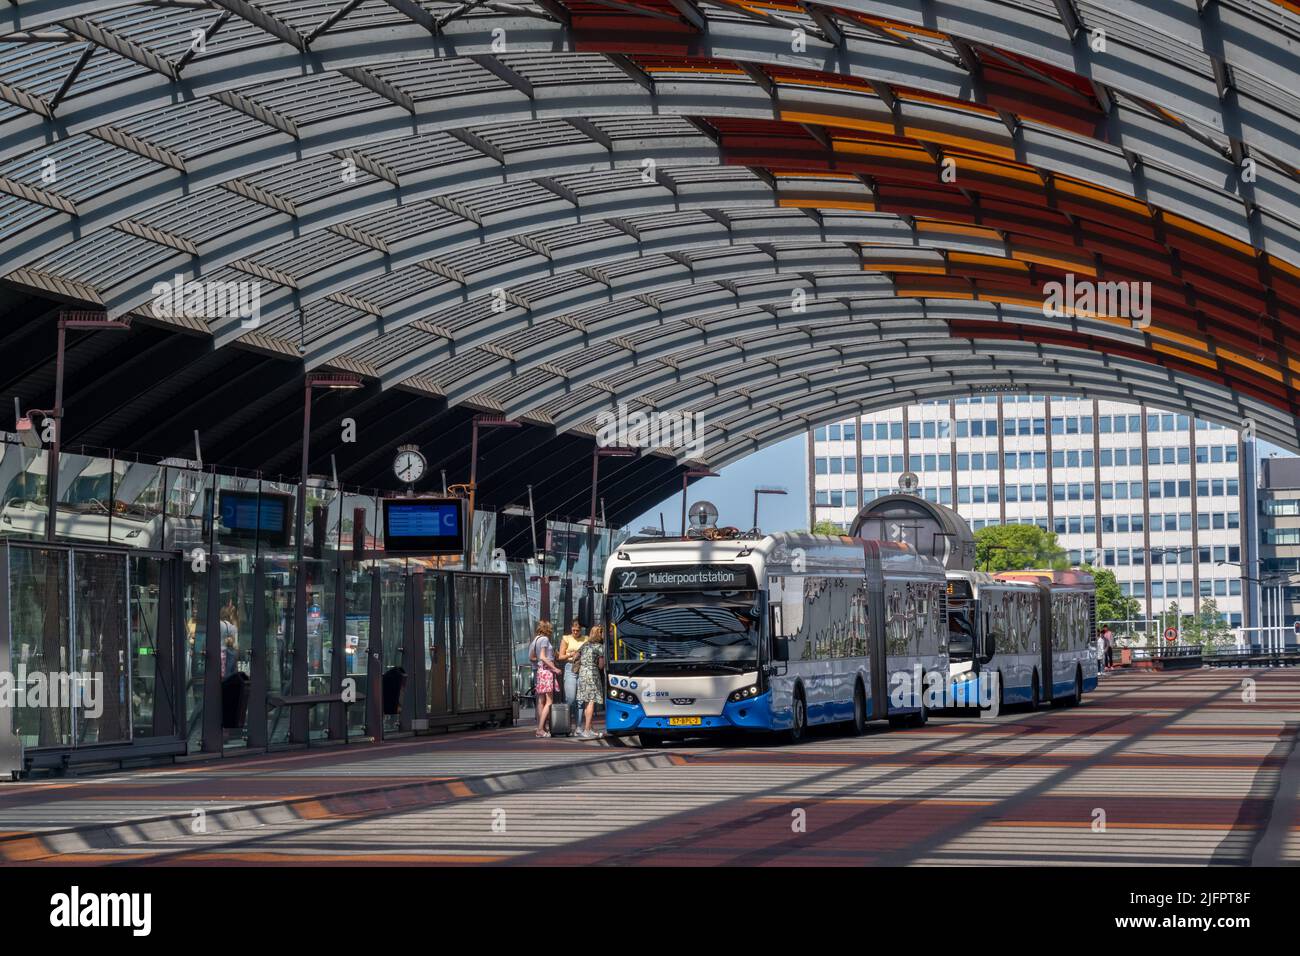 Amsterdam, The Netherlands - 21 June 2022: People boarding a GVB Bus at Amsterdam Central Station Bus Station Stock Photo